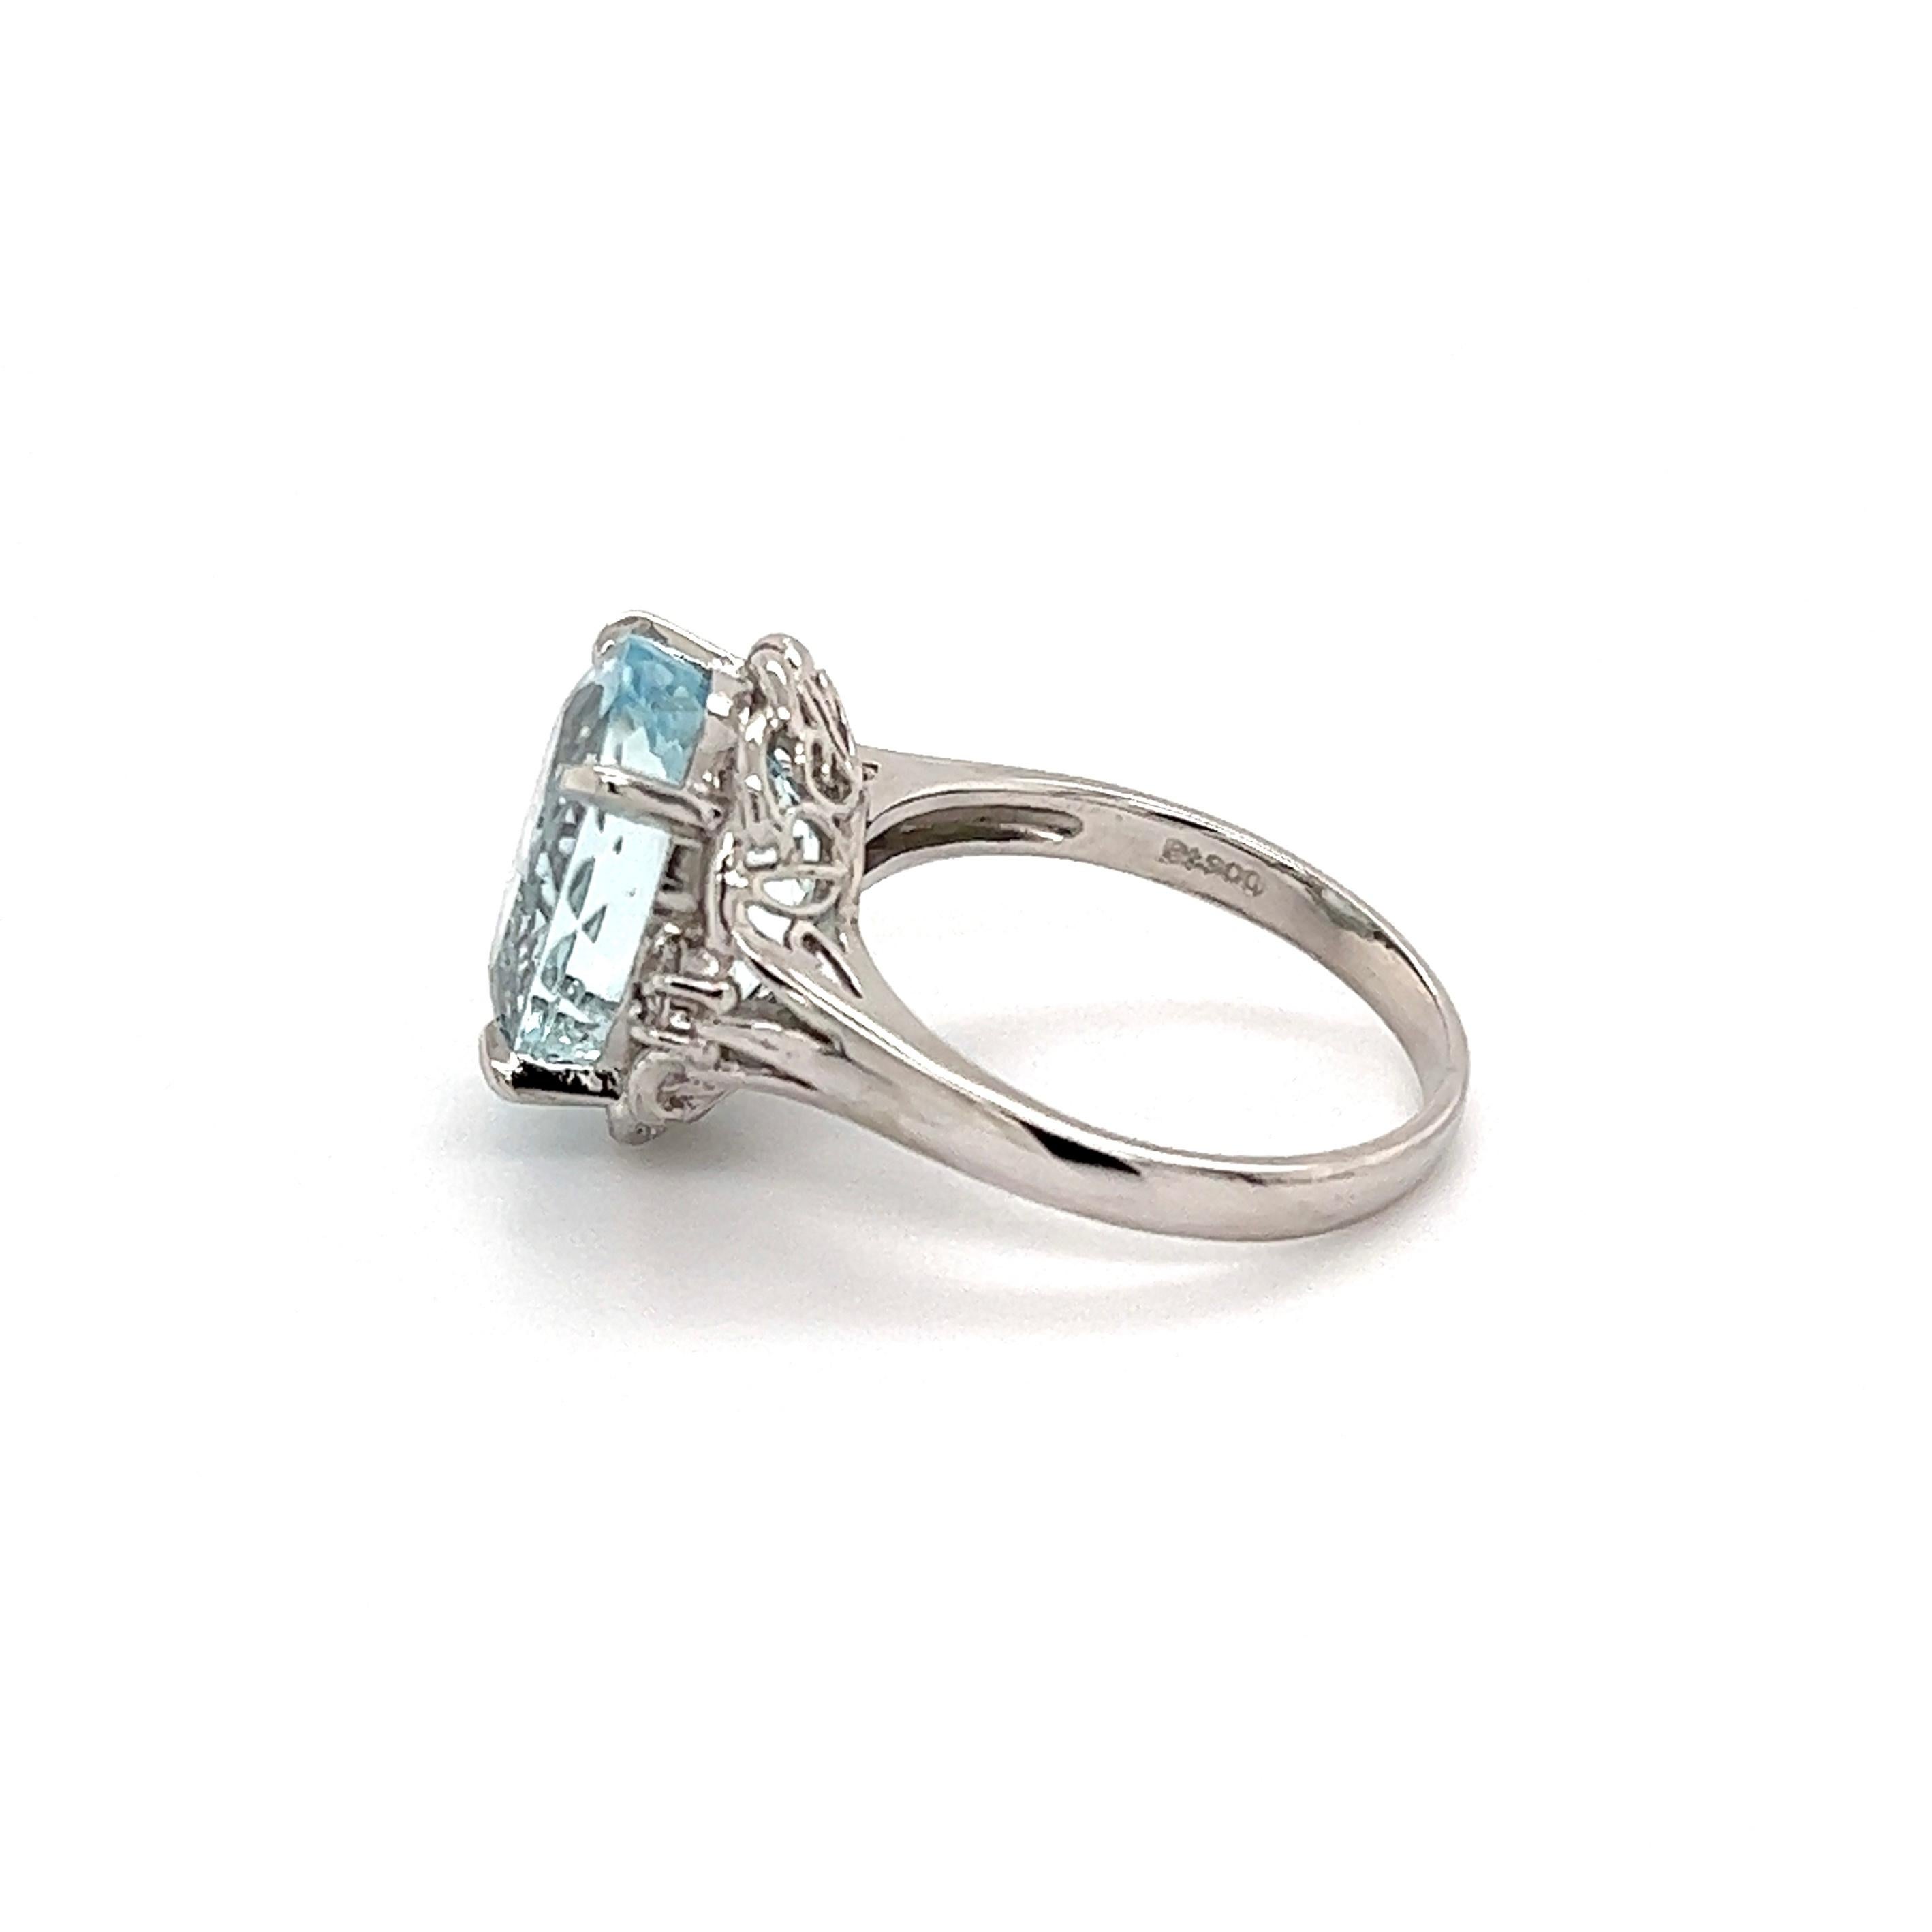 5.88 Carat Oval Aquamarine and Diamond Platinum Ring Estate Fine Jewelry In Excellent Condition For Sale In Montreal, QC